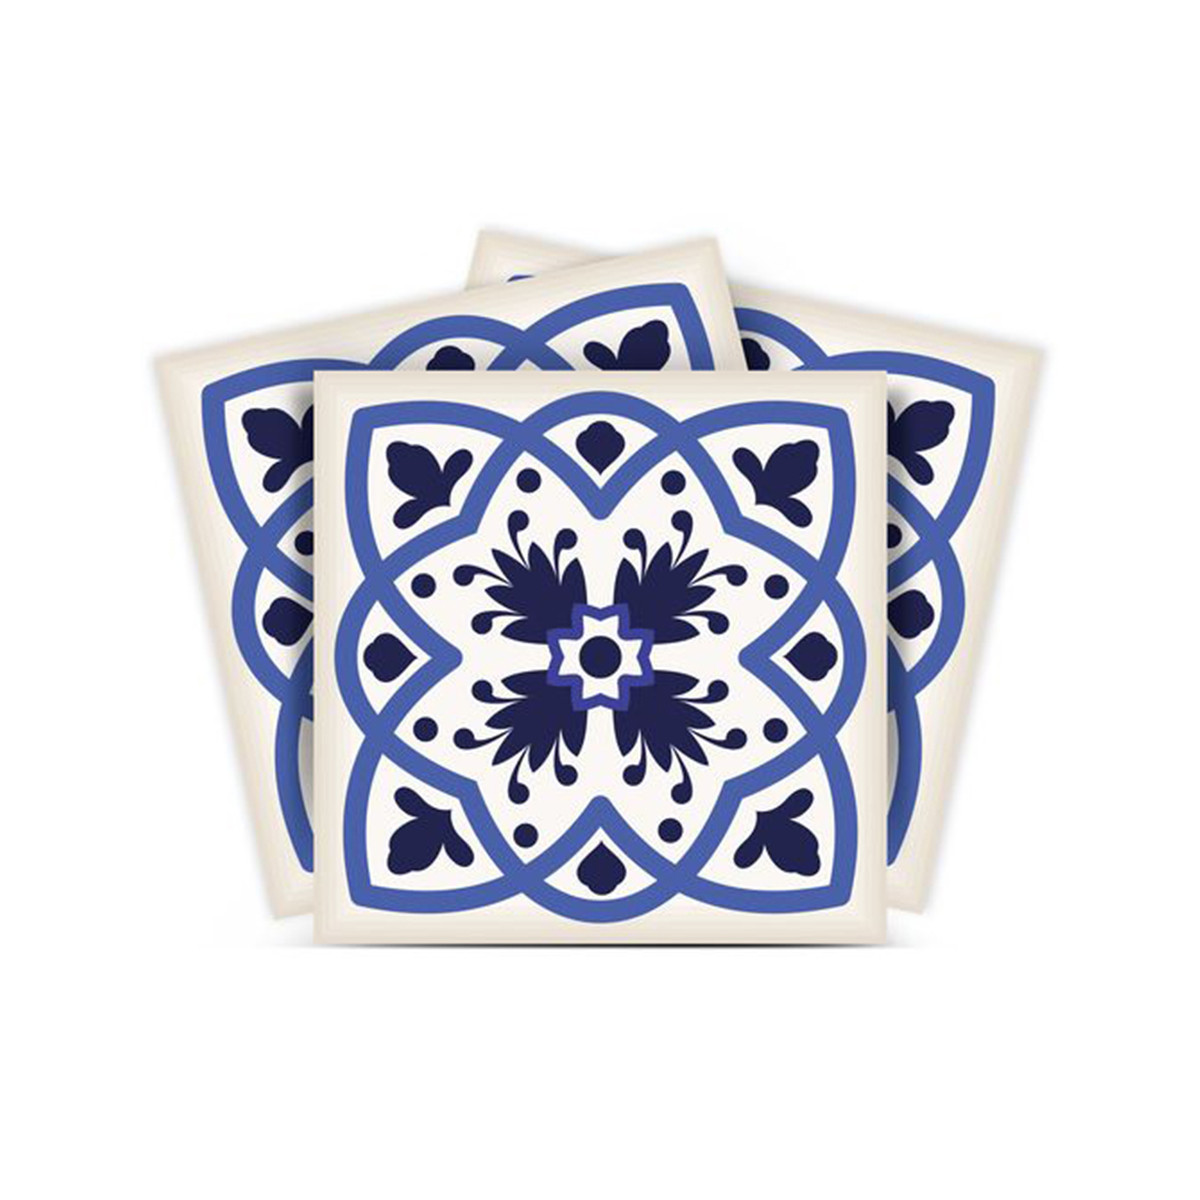 7" X 7" Blue And White Mosaic Peel And Stick Removable Tiles-399828-1